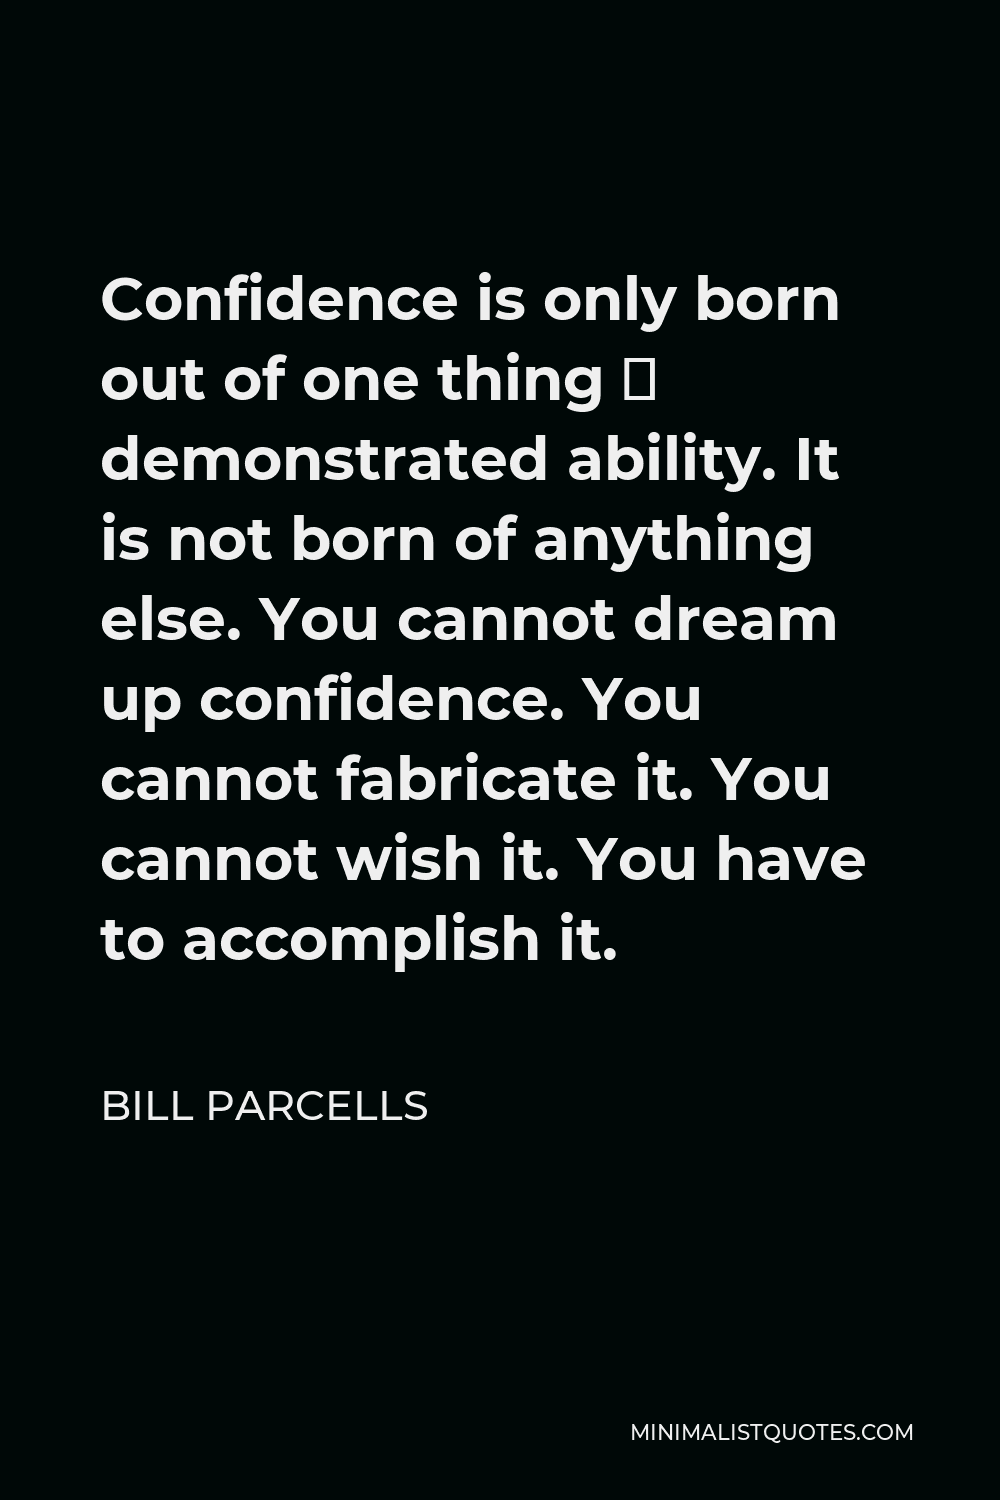 Bill Parcells Quote - Confidence is only born out of one thing ­ demonstrated ability. It is not born of anything else. You cannot dream up confidence. You cannot fabricate it. You cannot wish it. You have to accomplish it.